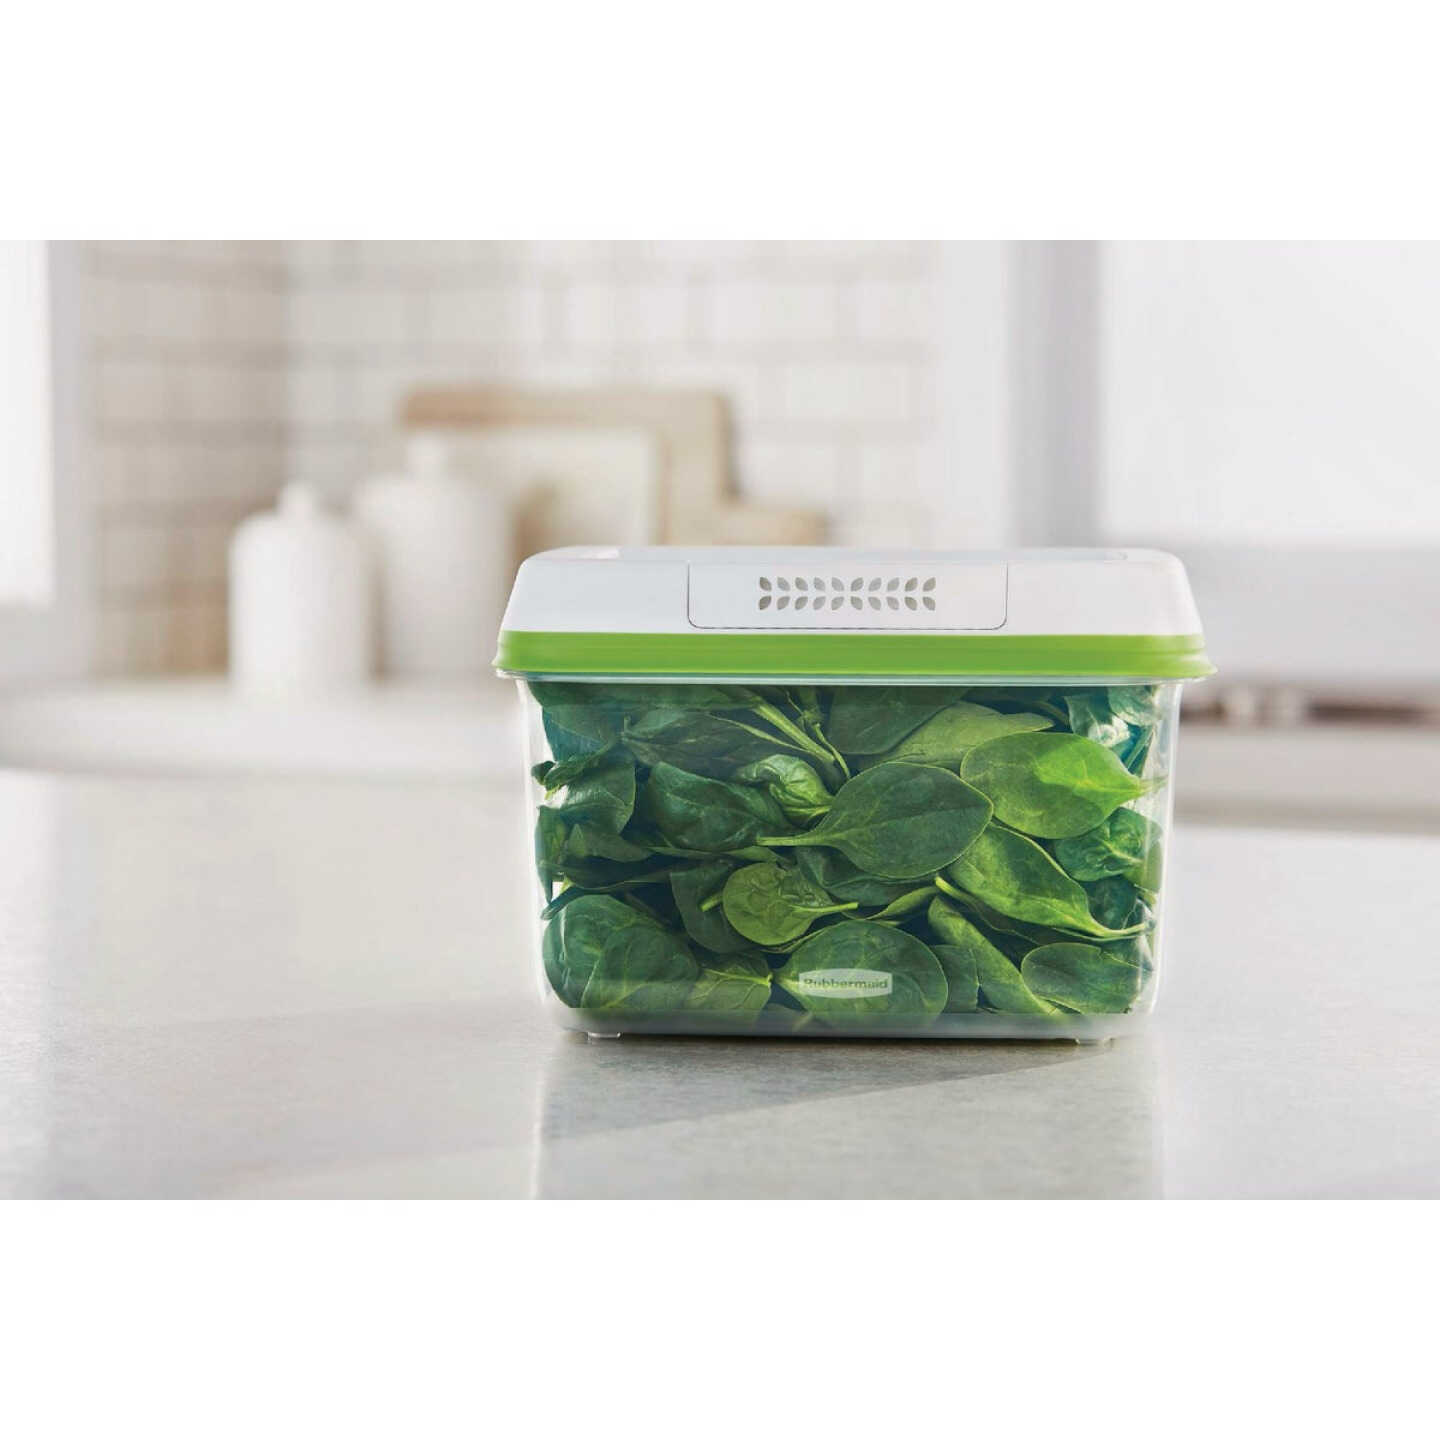 Rubbermaid Freshworks Produce Saver Container 6 Pc. Set